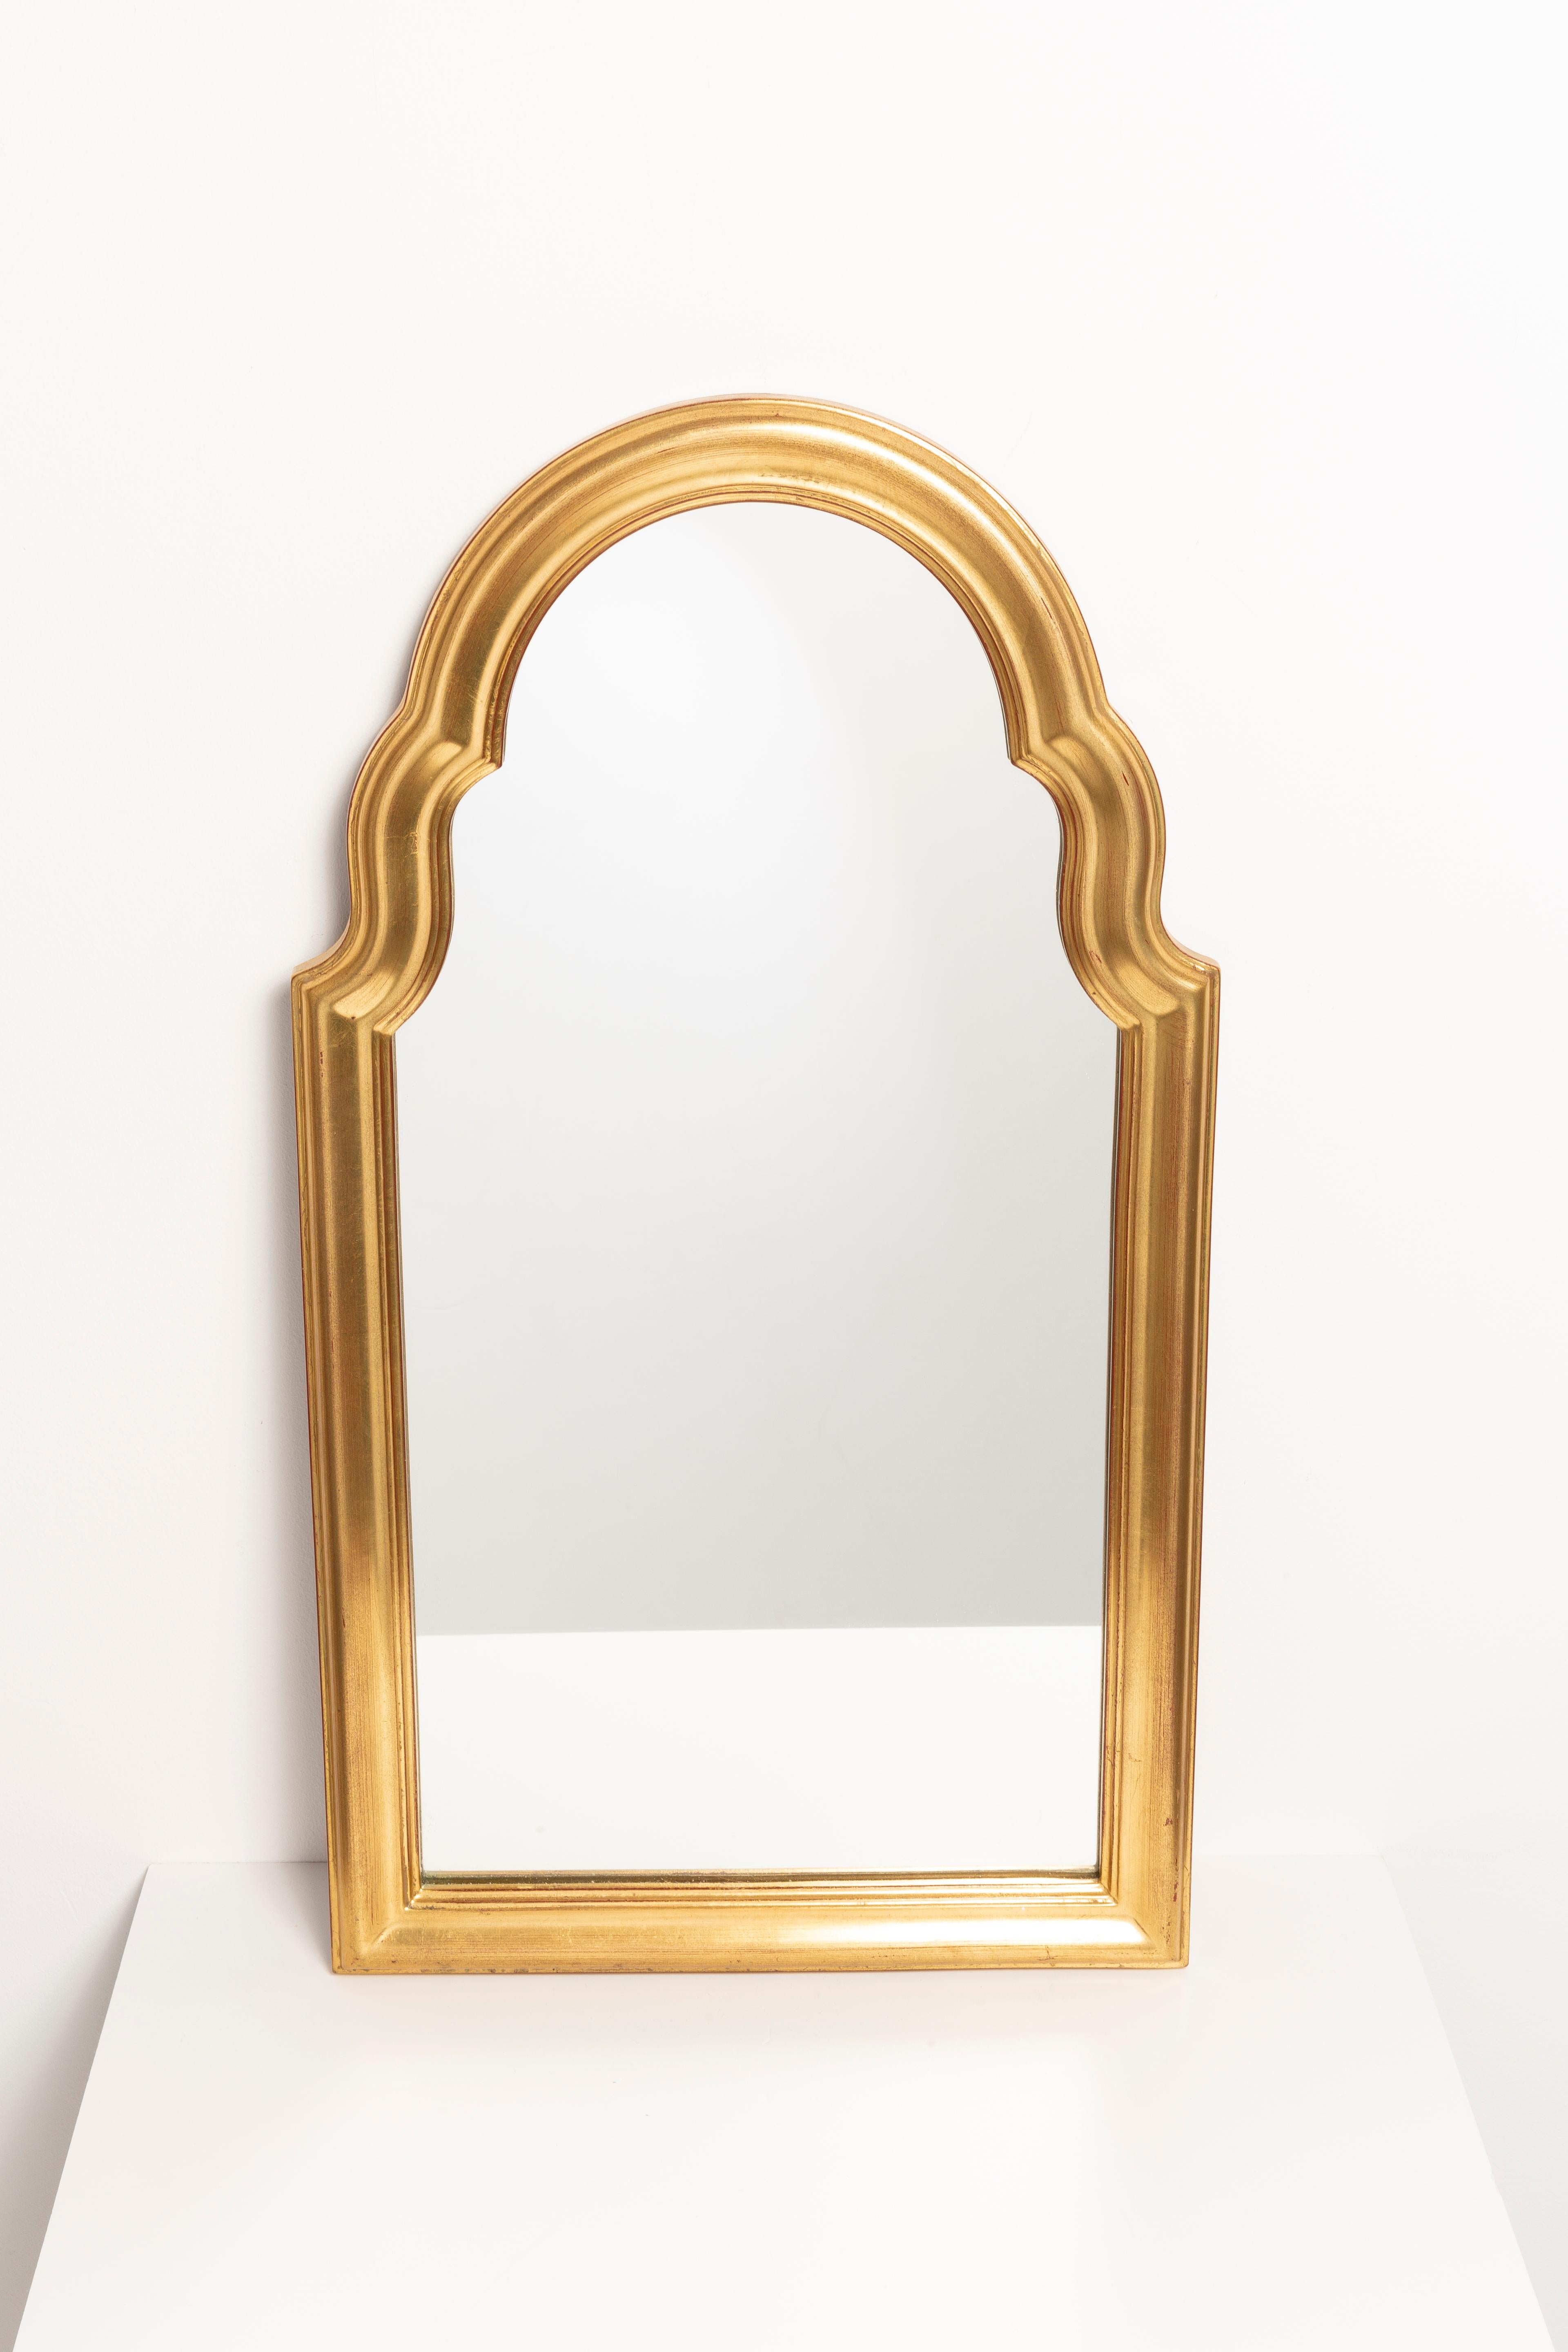 A medium mirror in a golden decorative frame from Belgium. The frame is made of wood. Mirror is in very good vintage condition, no damage or cracks in the frame. Original glass. Beautiful piece for every interior! Only one unique piece.